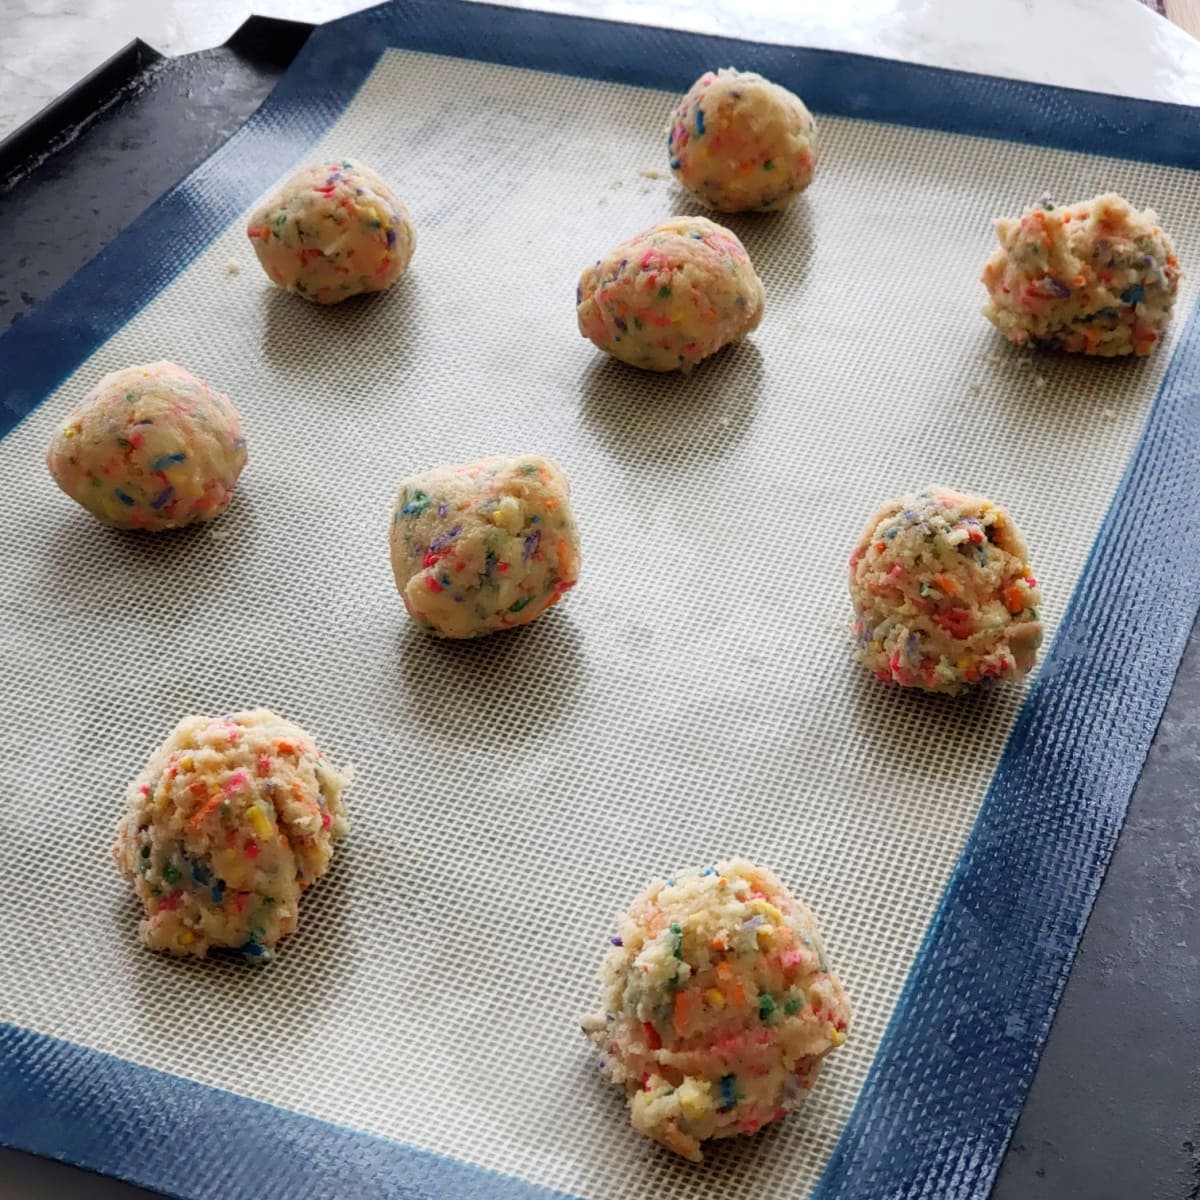 9 balls of cookie dough on a silicone lined baking sheet ready to bake